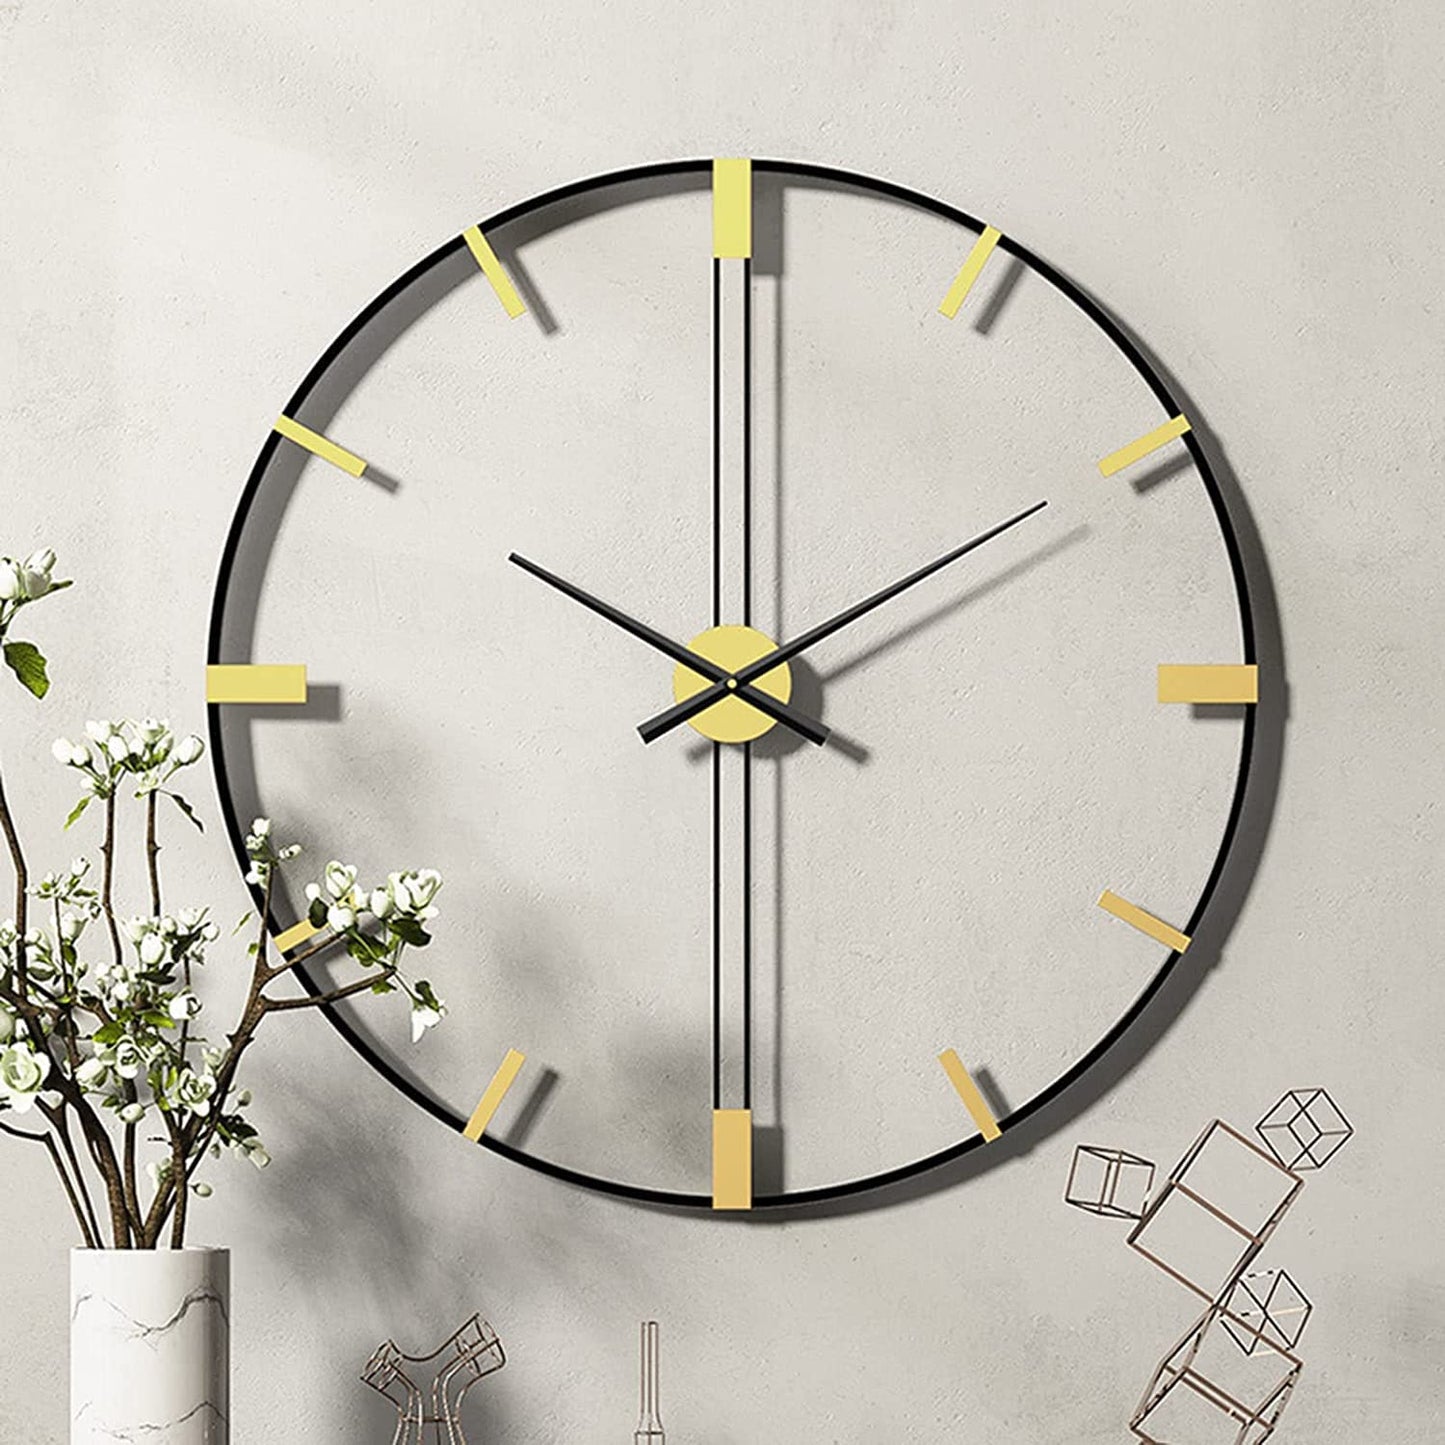 WALL CLOCK MUTE ROUND WALL CLOCKS NON-TICKING BATTERY OPERATED CLOCK FOR LIVING ROOM BEDROOM HOME DECOR